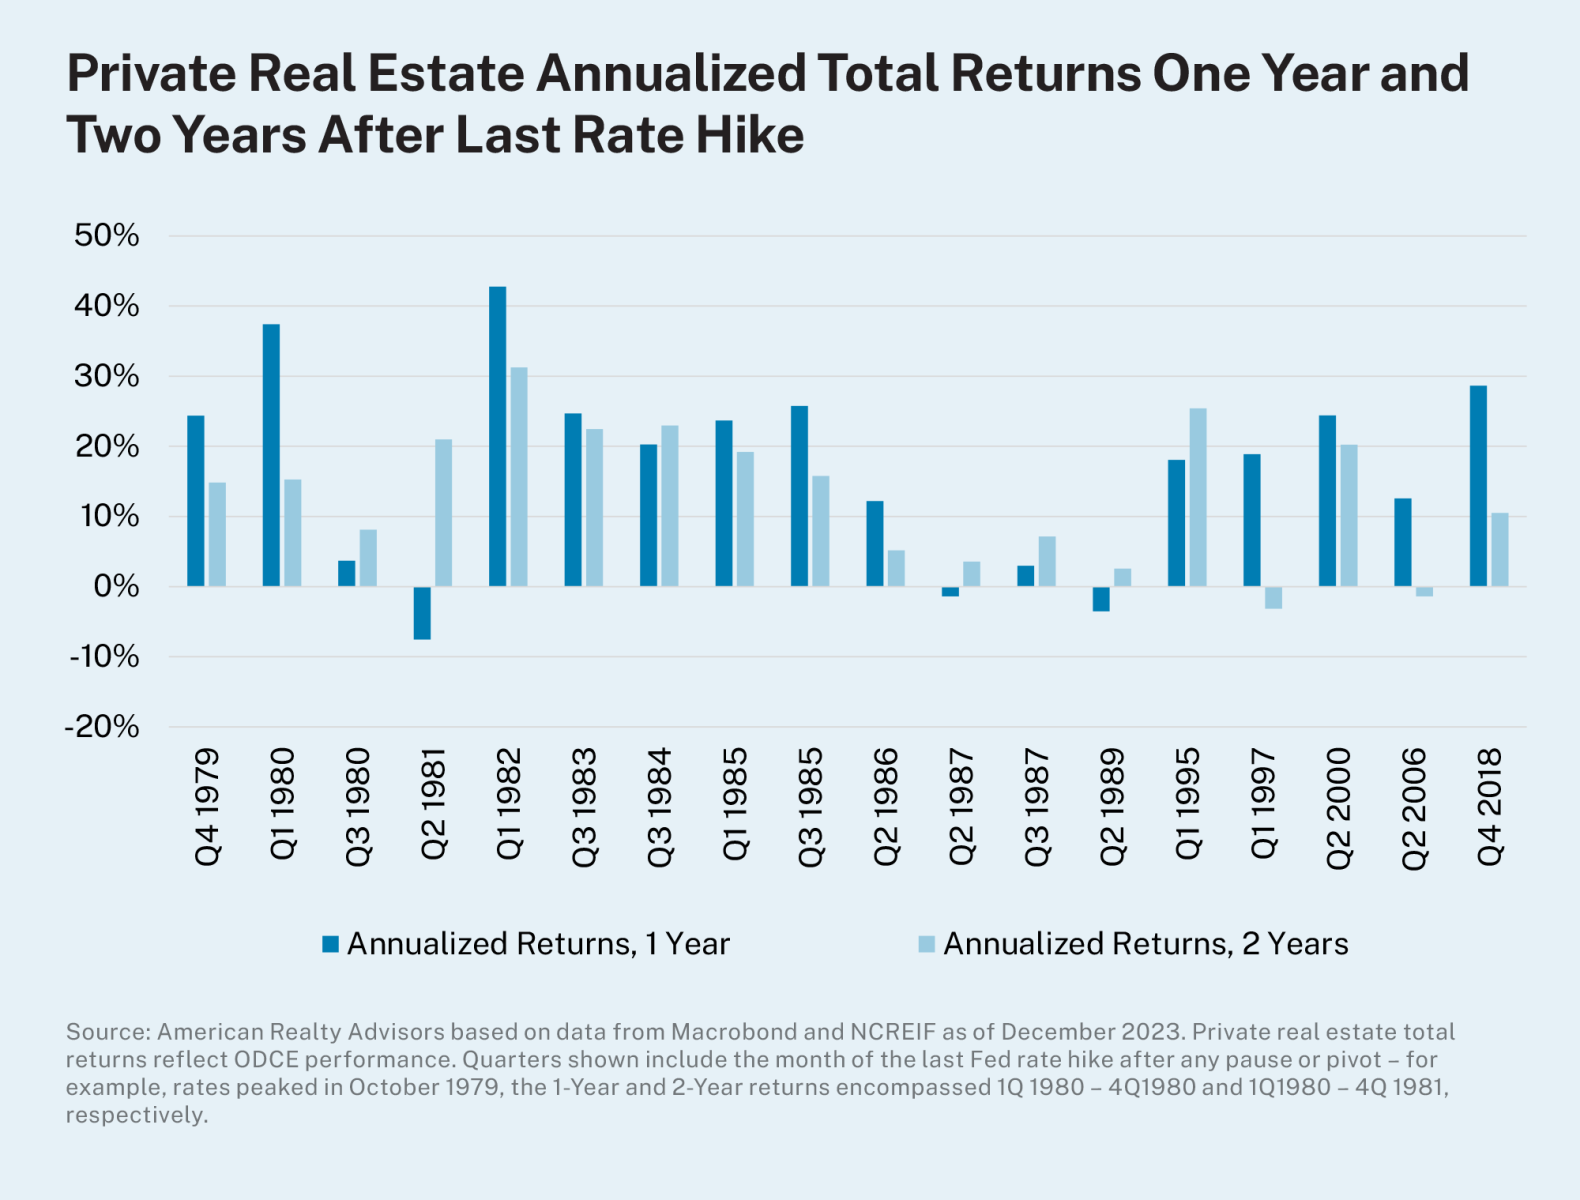 Bar chart showing 1- and 2-year annualized private core real estate returns in periods following peak rates.  